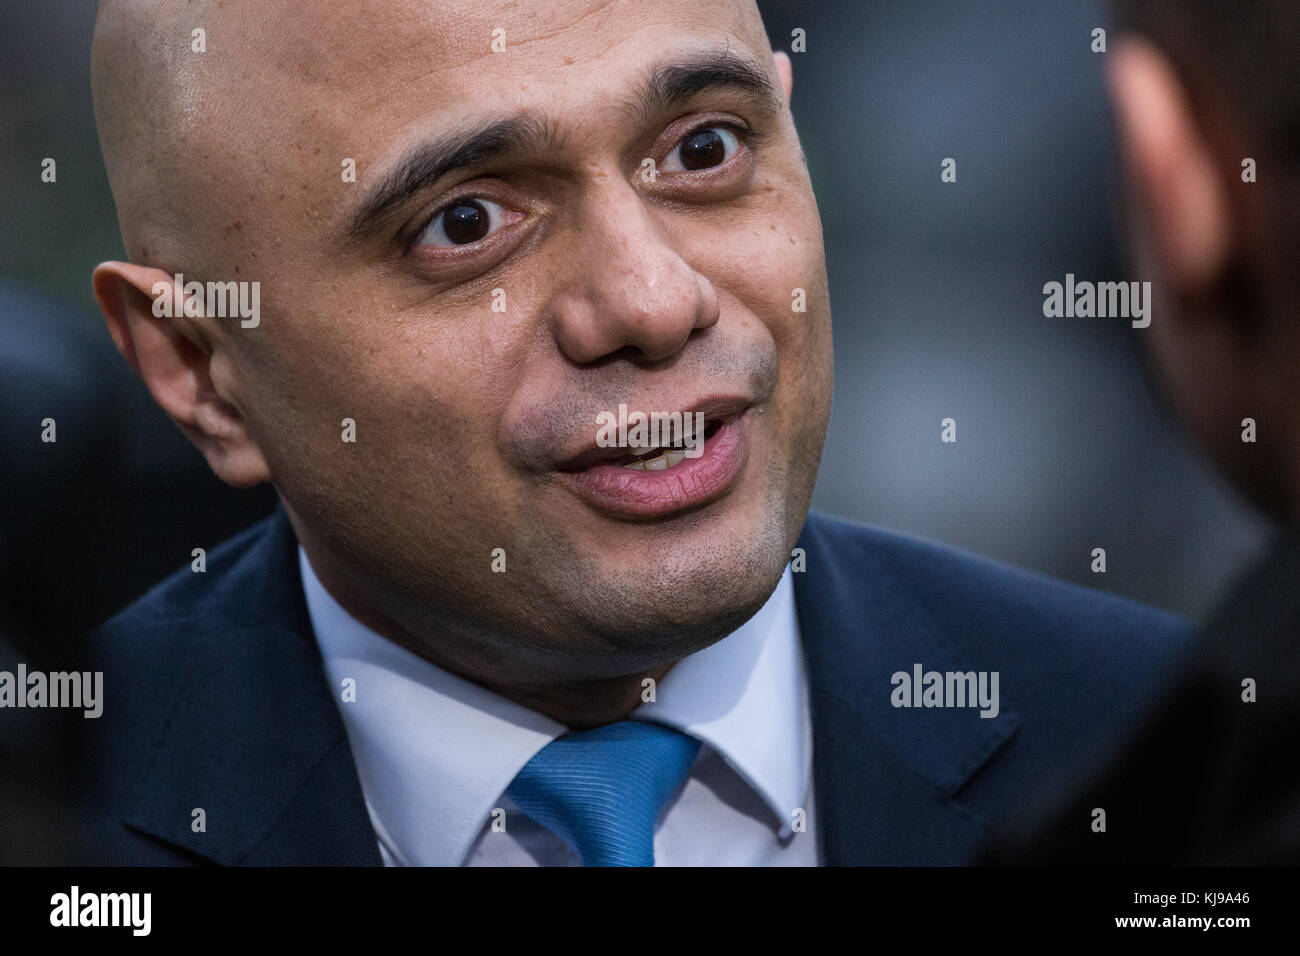 London, UK. 22nd November, 2017. Sajid Javid MP, Secretary of State for Communities and Local Government, gives his opinion on Chancellor of the Exchequer Philip Hammond's Budget announcement during an interview with broadcast media on College Green. Credit: Mark Kerrison/Alamy Live News Stock Photo